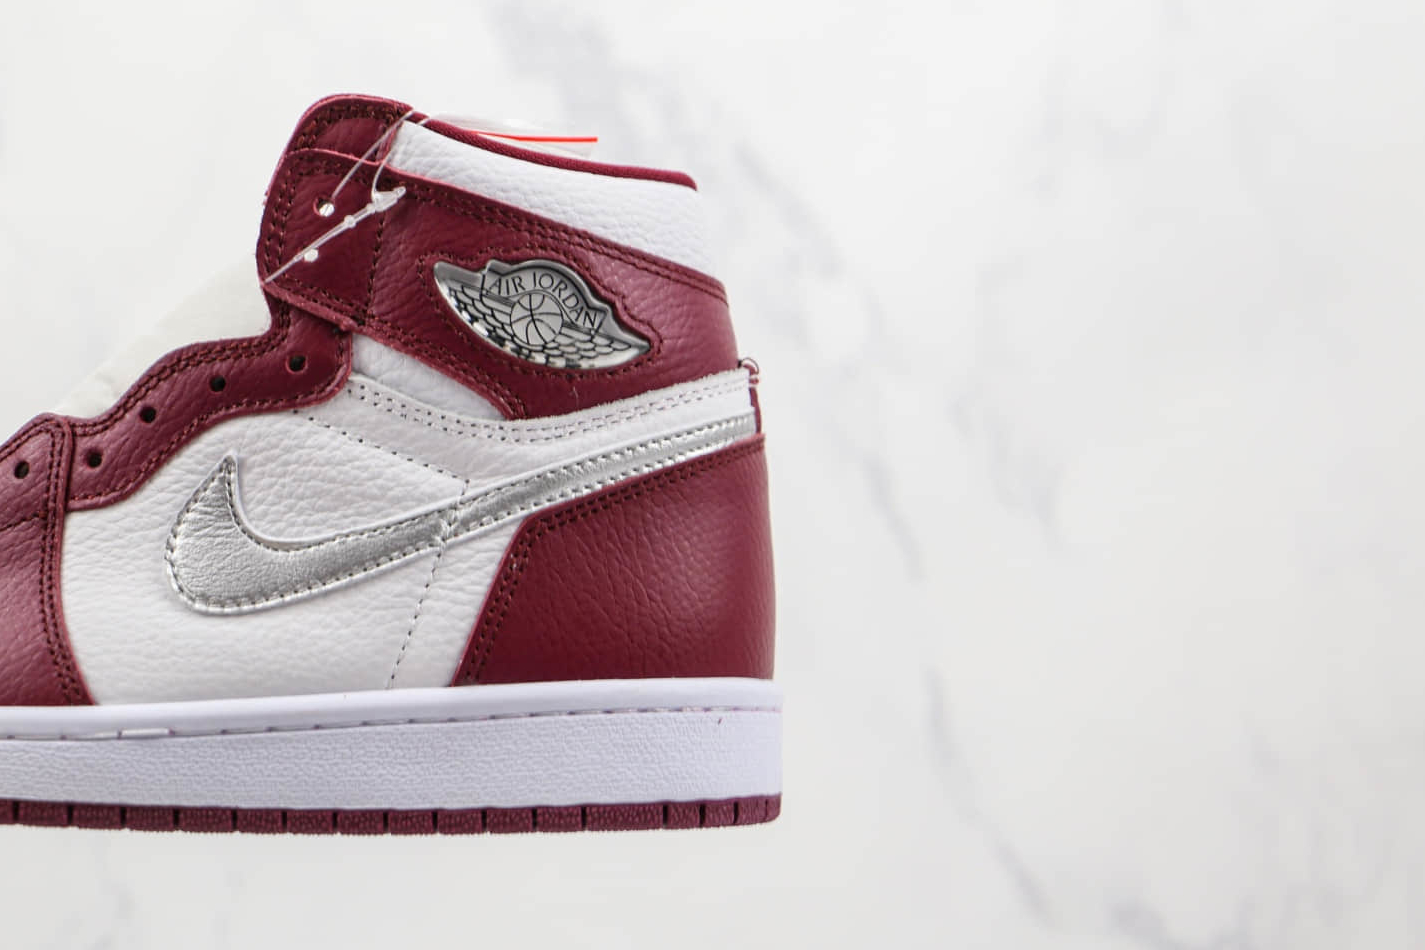 Air Jordan 1 Retro High OG 'Bordeaux' 555088-611 - Iconic Sneakers for Style and Comfort